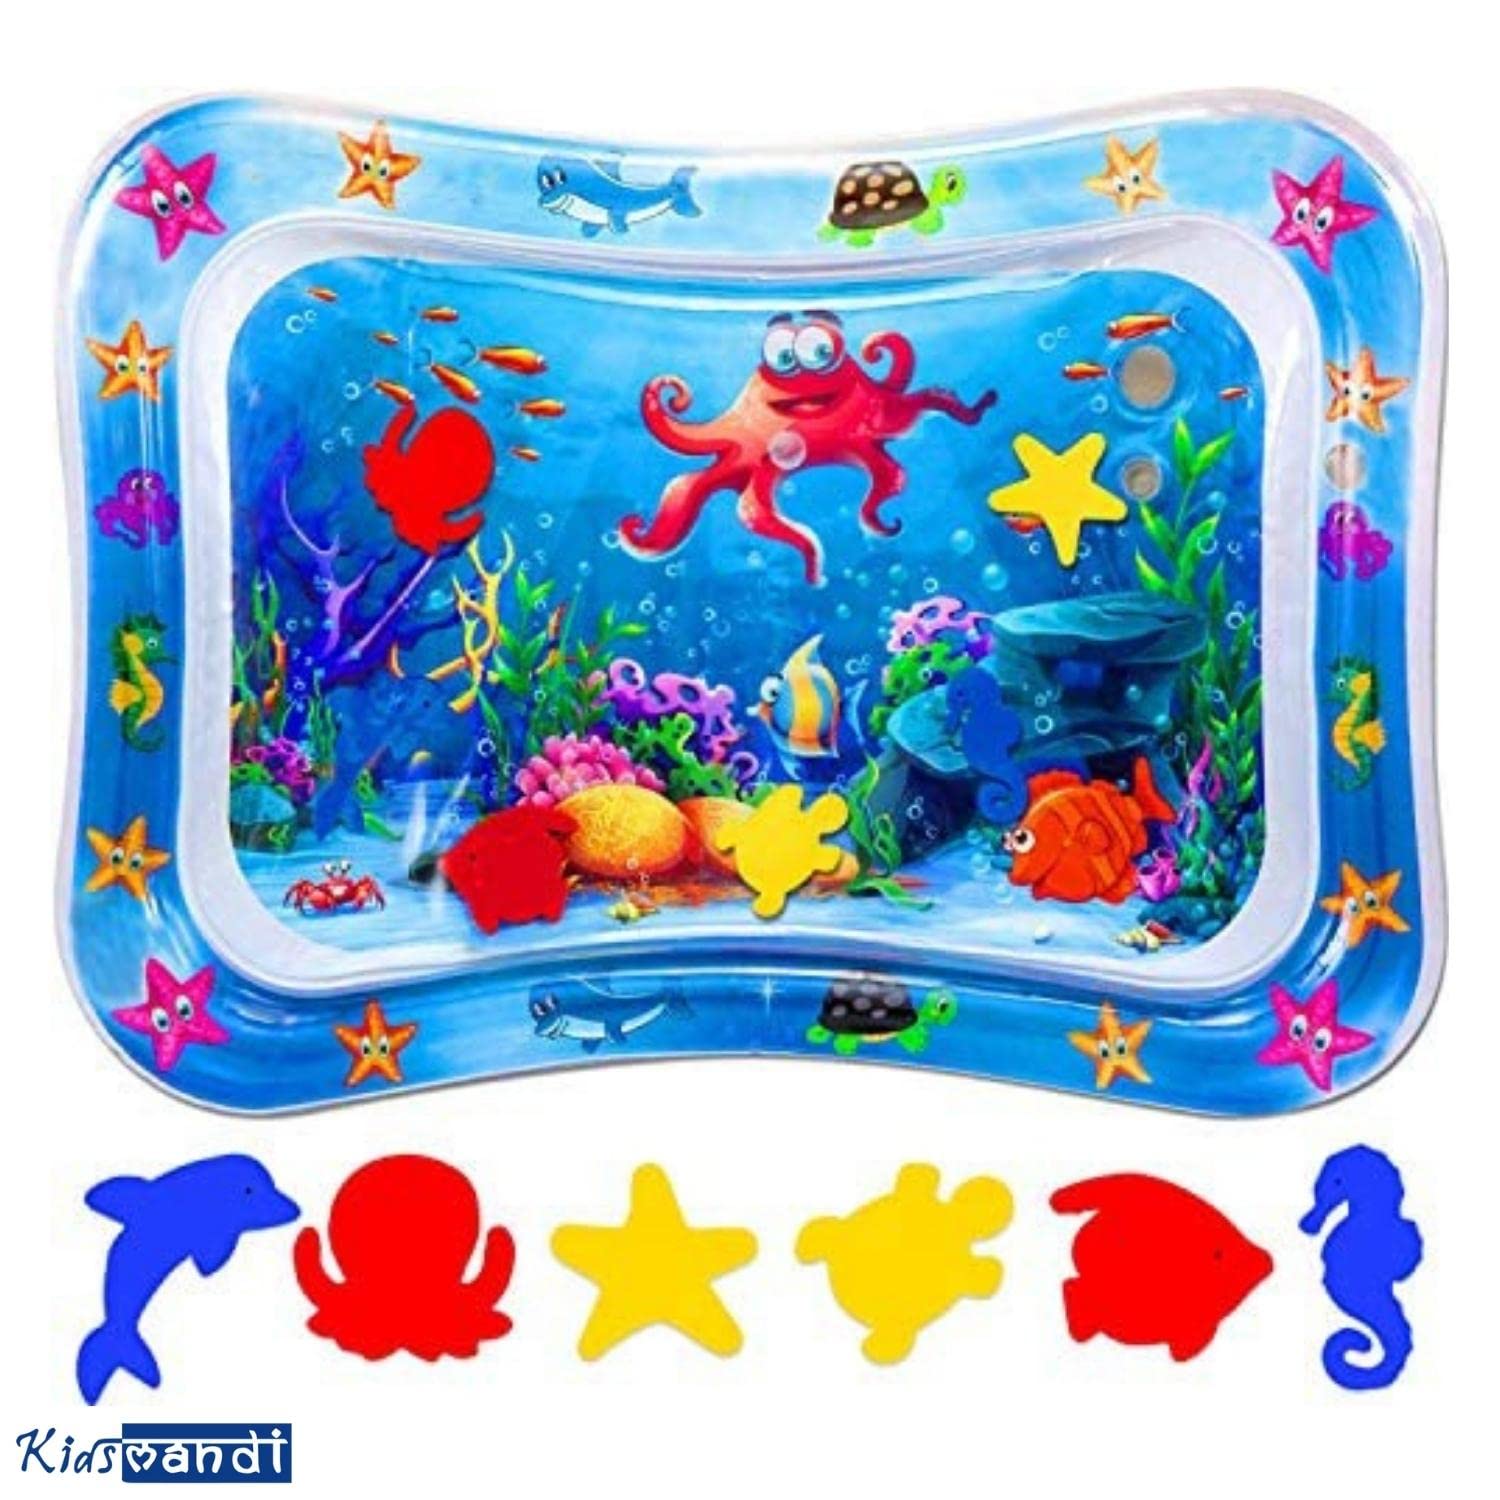 Kids Mandi tummy time mat water play for infants.